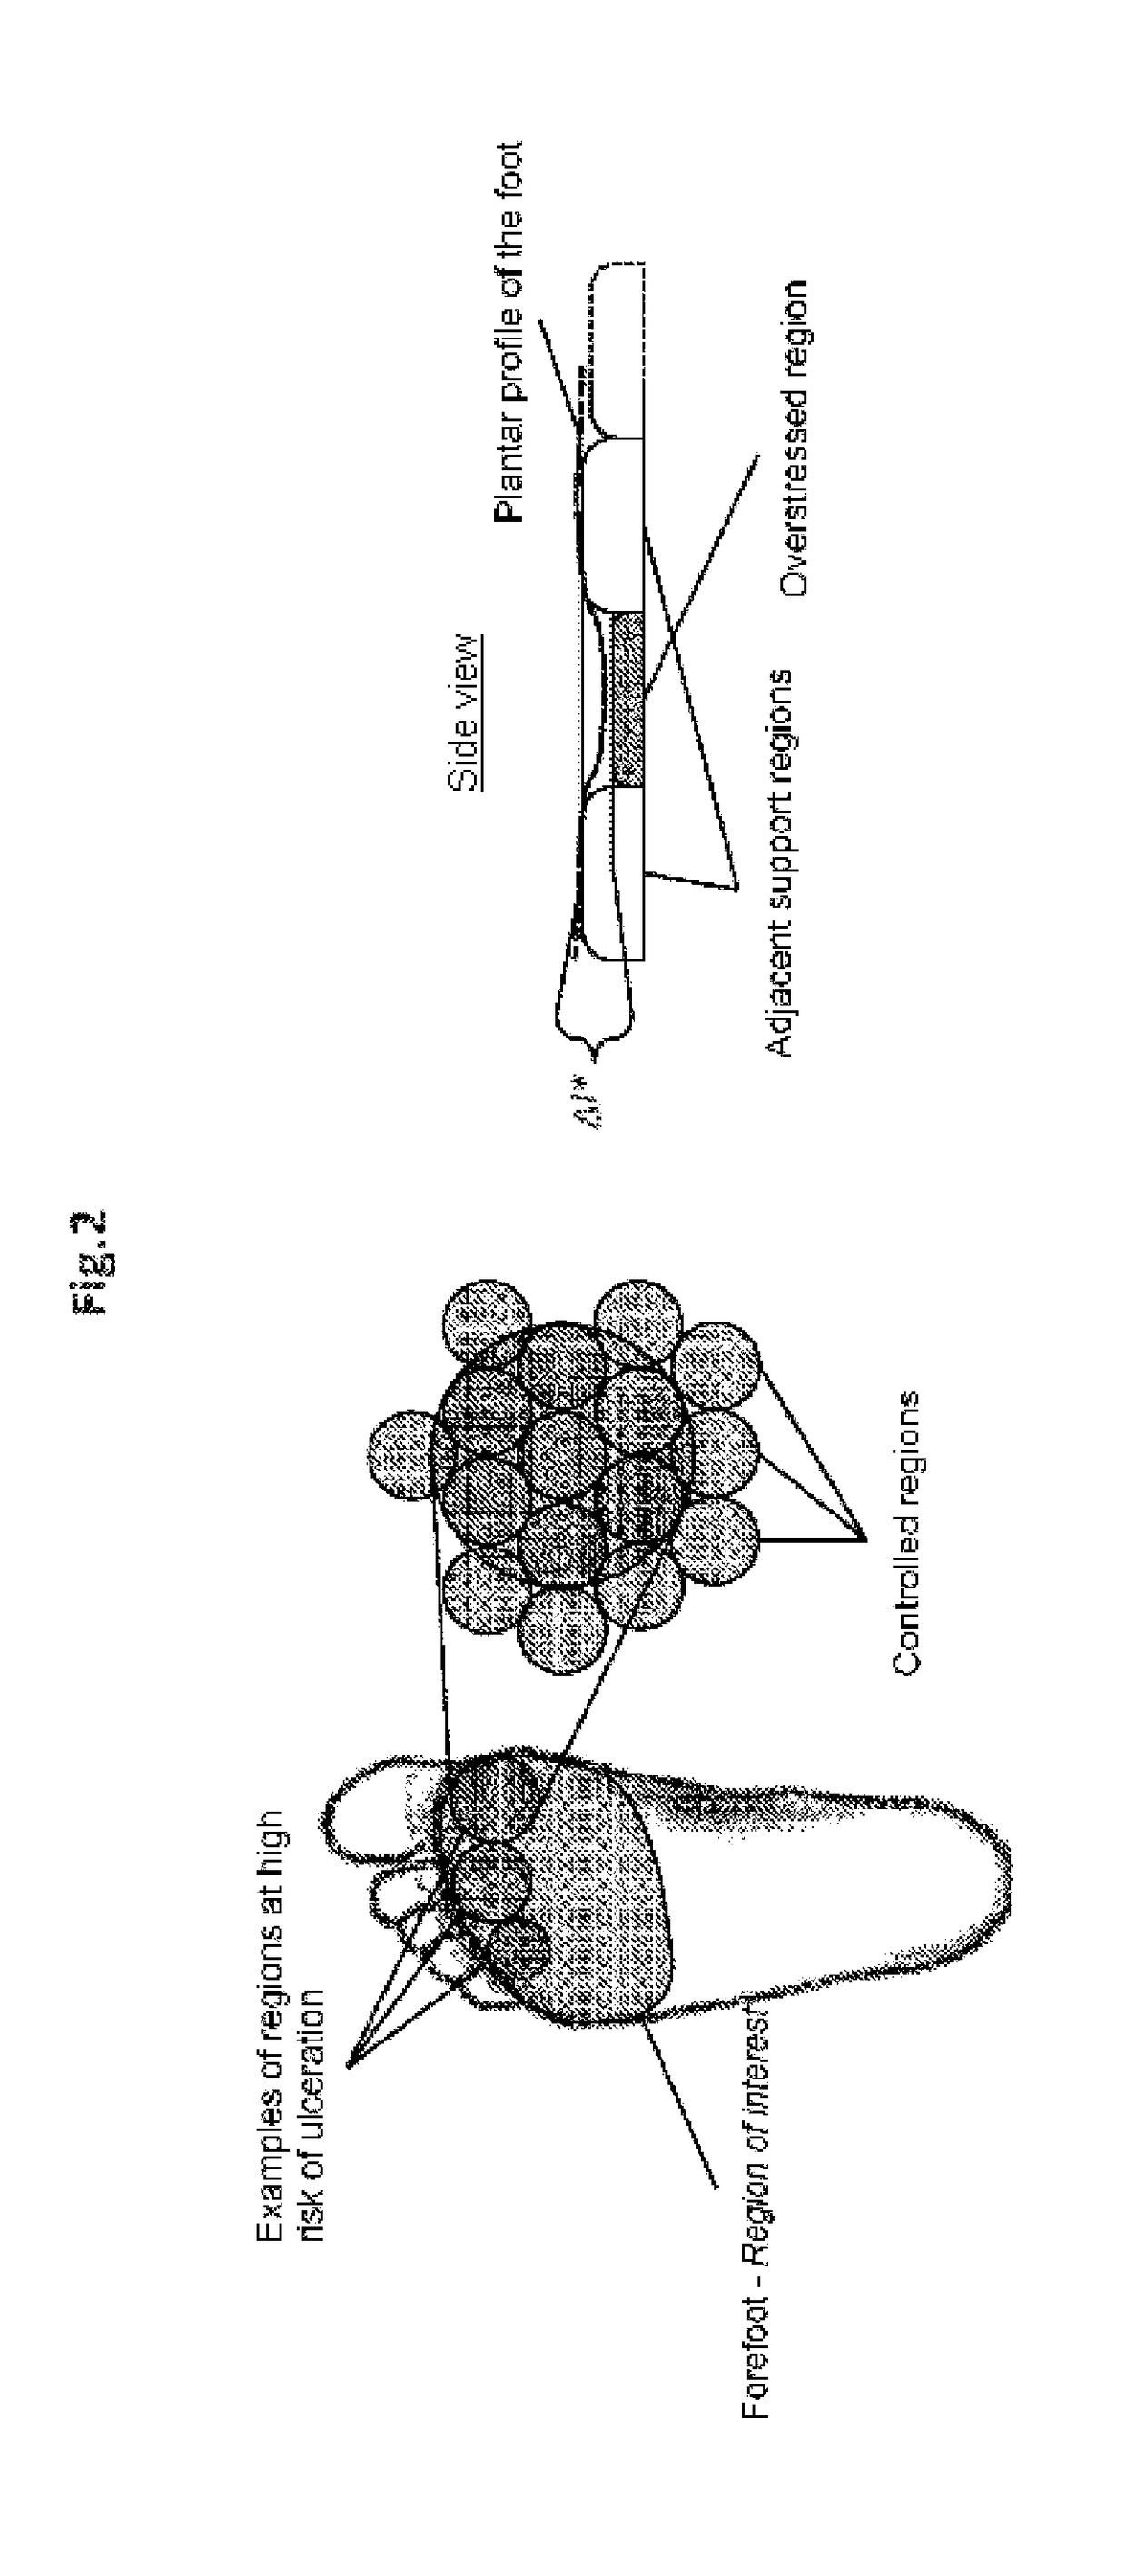 System for Adjusting Pressure Locally on the Skin and Subcutaneous Tissue